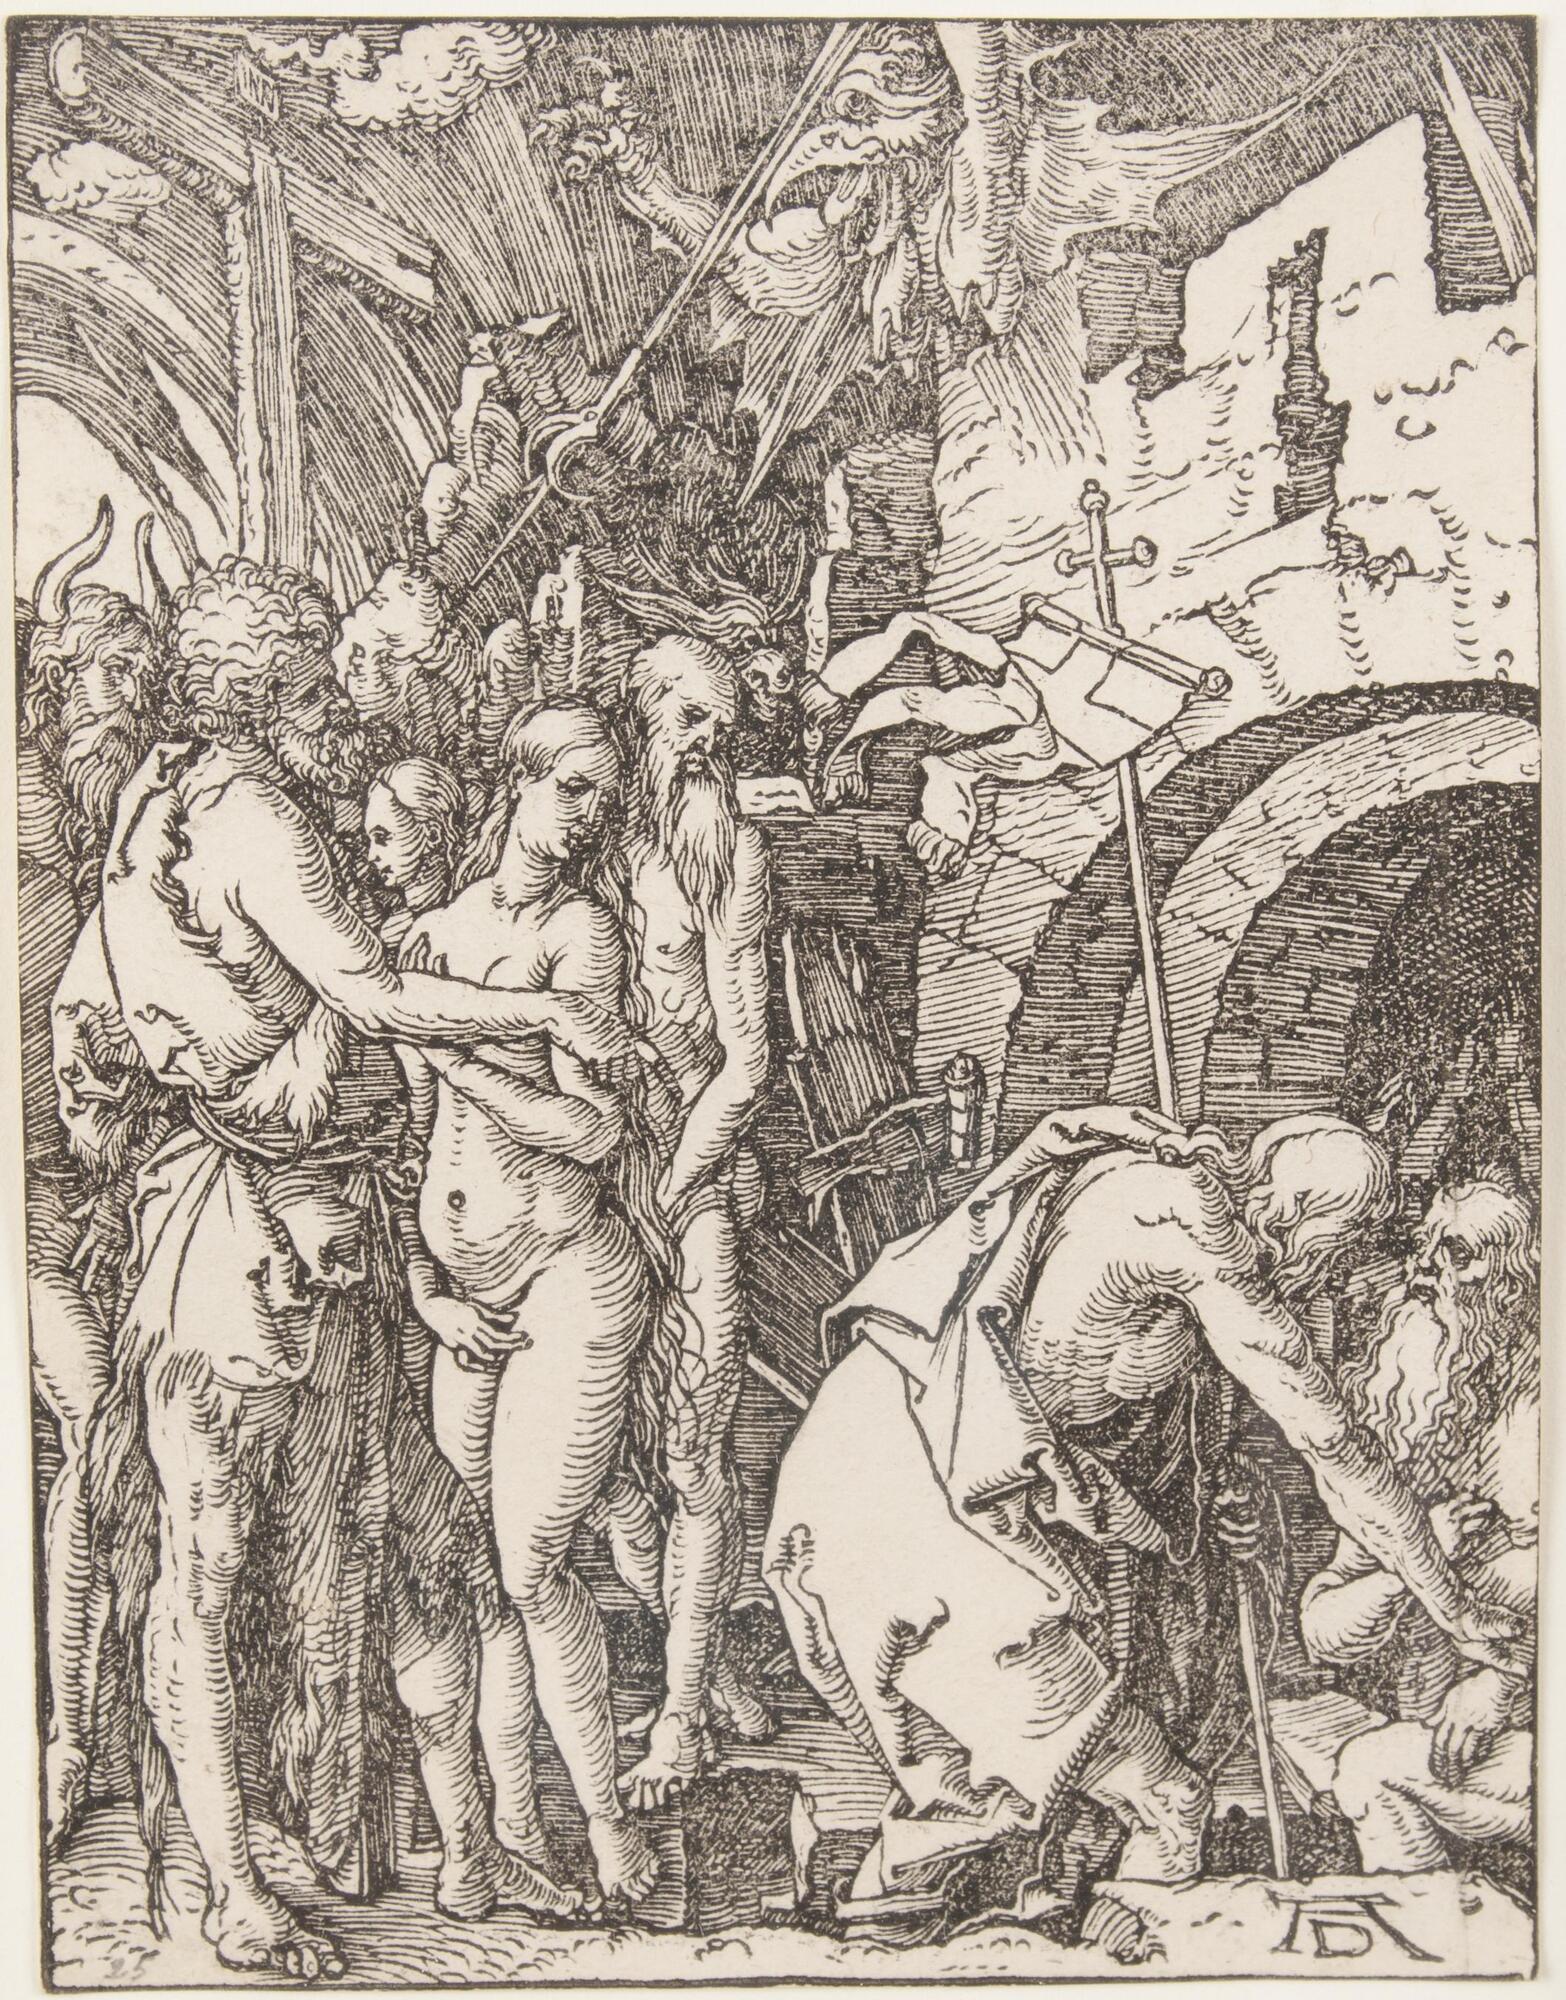 A group of figures at the left stand in a vaulted space under a cross. They look towards the lower right of the composition where a man holding a standard with a cross on top is bending forward and offering his hand to an old bearded man in an arched doorway. Above the doorway are several fantastical figures with beaked or animal heads and arms with claws. Signed in the block "AD", lower right, recto.